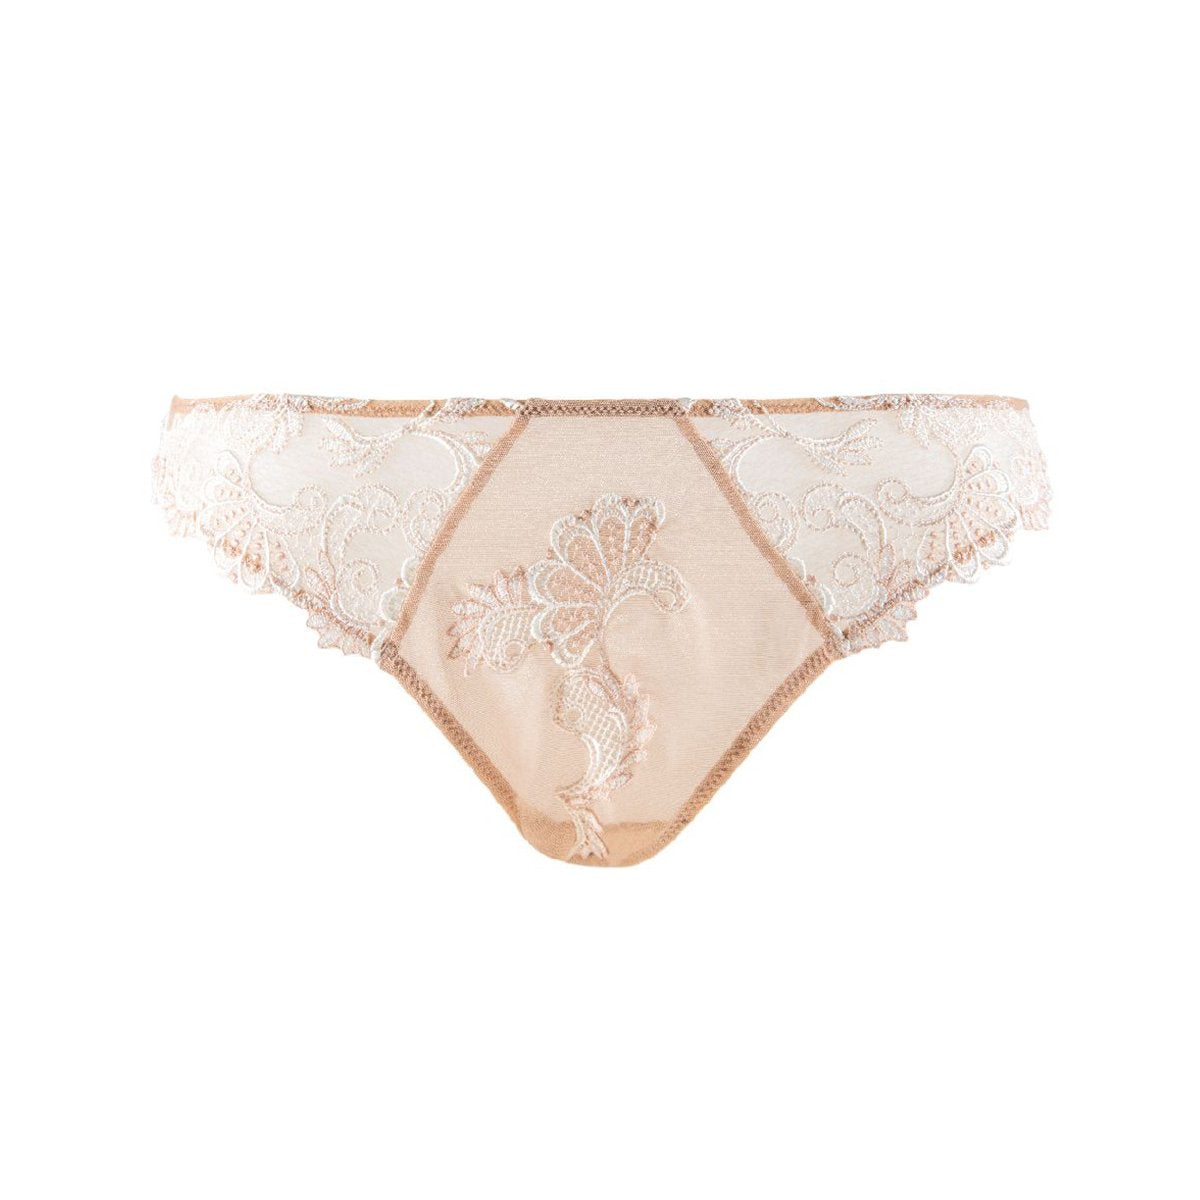 Vanilla Fudge Lingerie - lise-Charmel a nude for all seasons Splendeur  Soie, a beautiful silk and lace collection. Elegant and feminine pieces in  stunning detailing. A luxury yet comfortable style to make